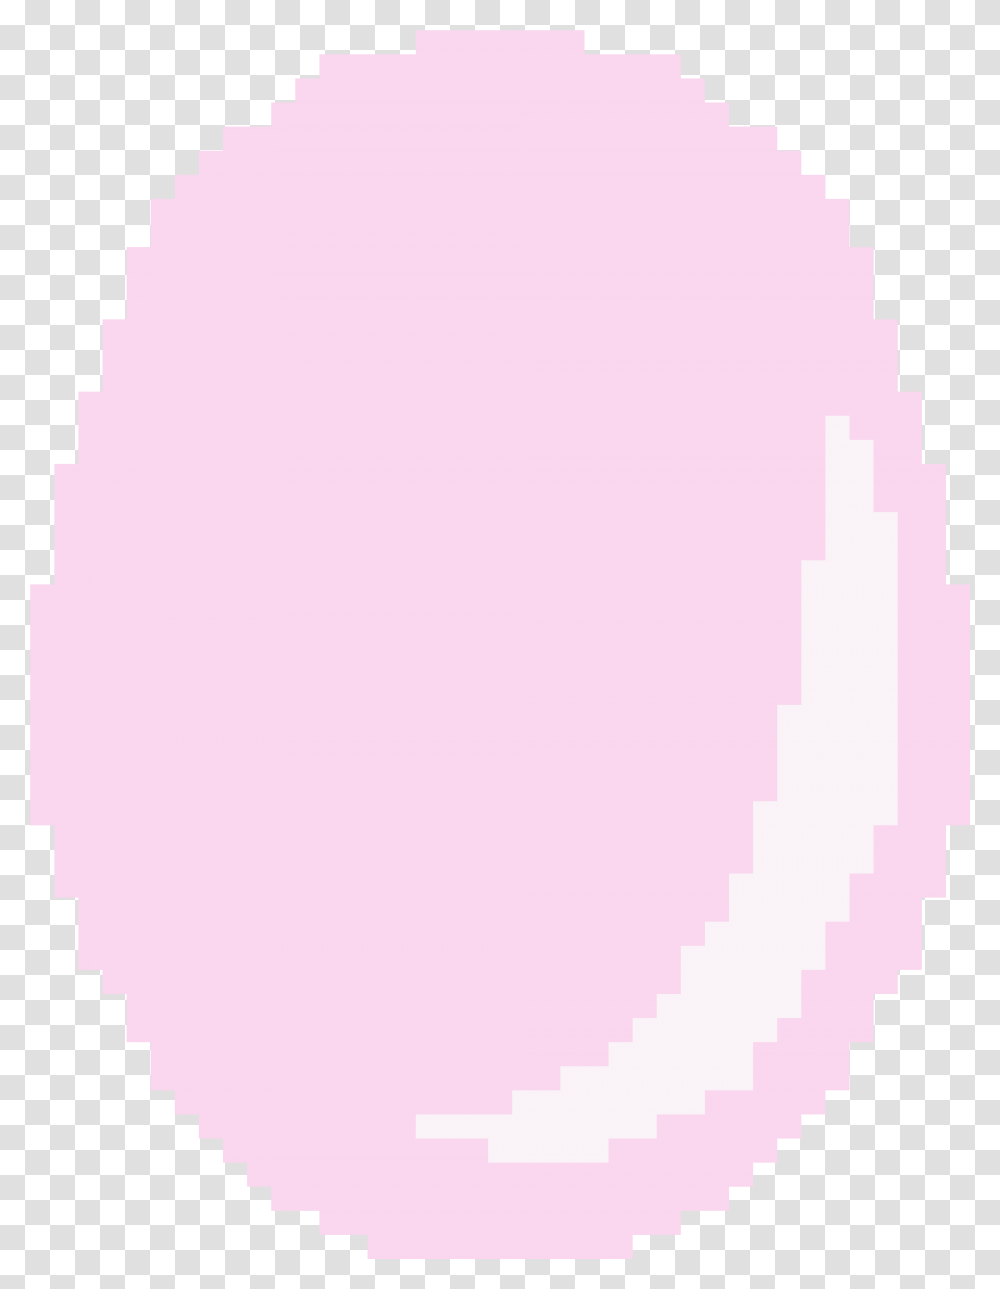 Cotton Candy Gif, Rug, Oval, Cushion, Pillow Transparent Png